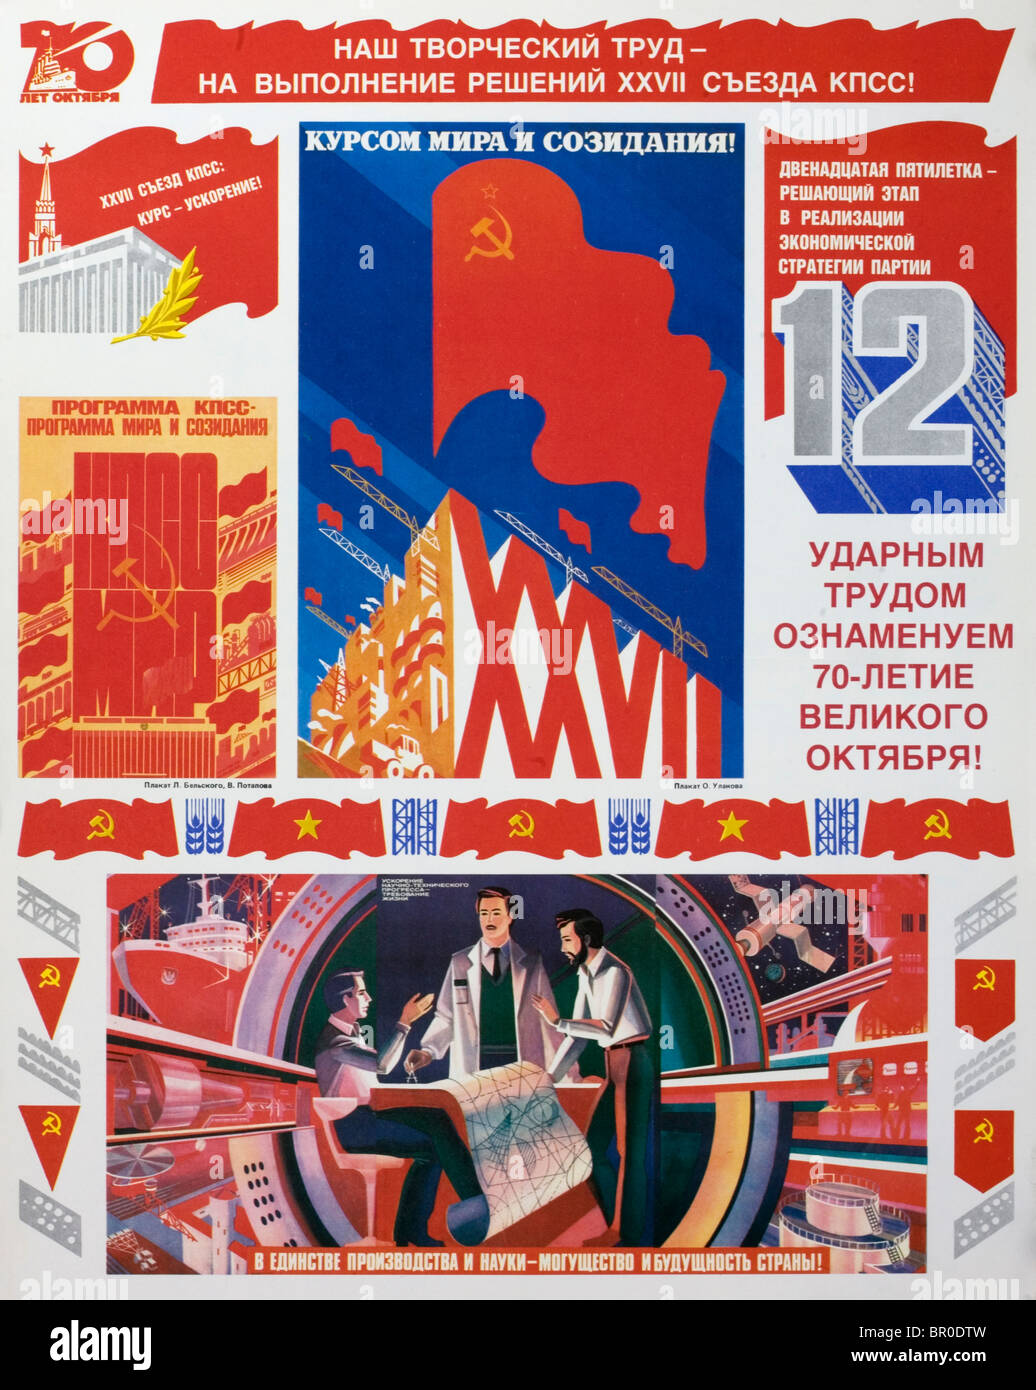 Poster celebrating industry and science in the Soviet Union (USSR). Stock Photo